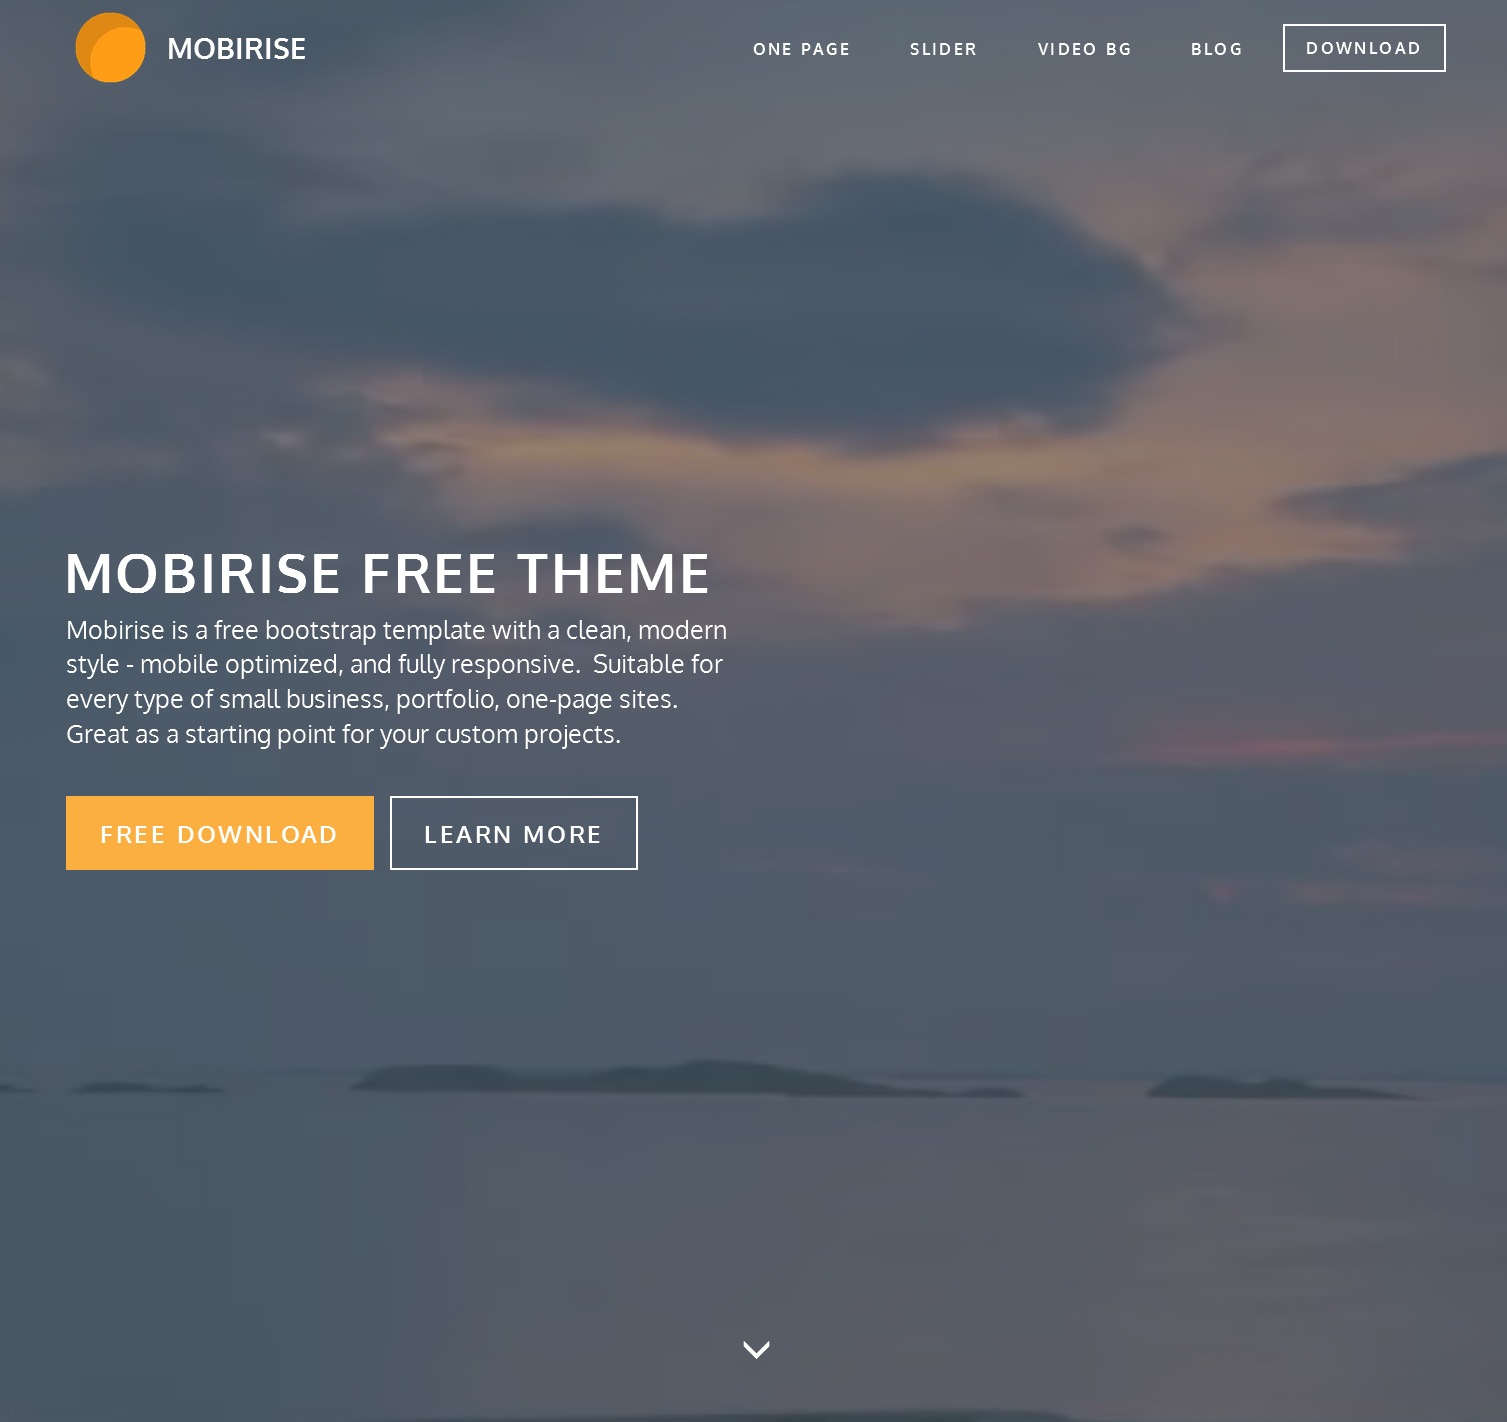 Free Download Bootstrap Blog Theme